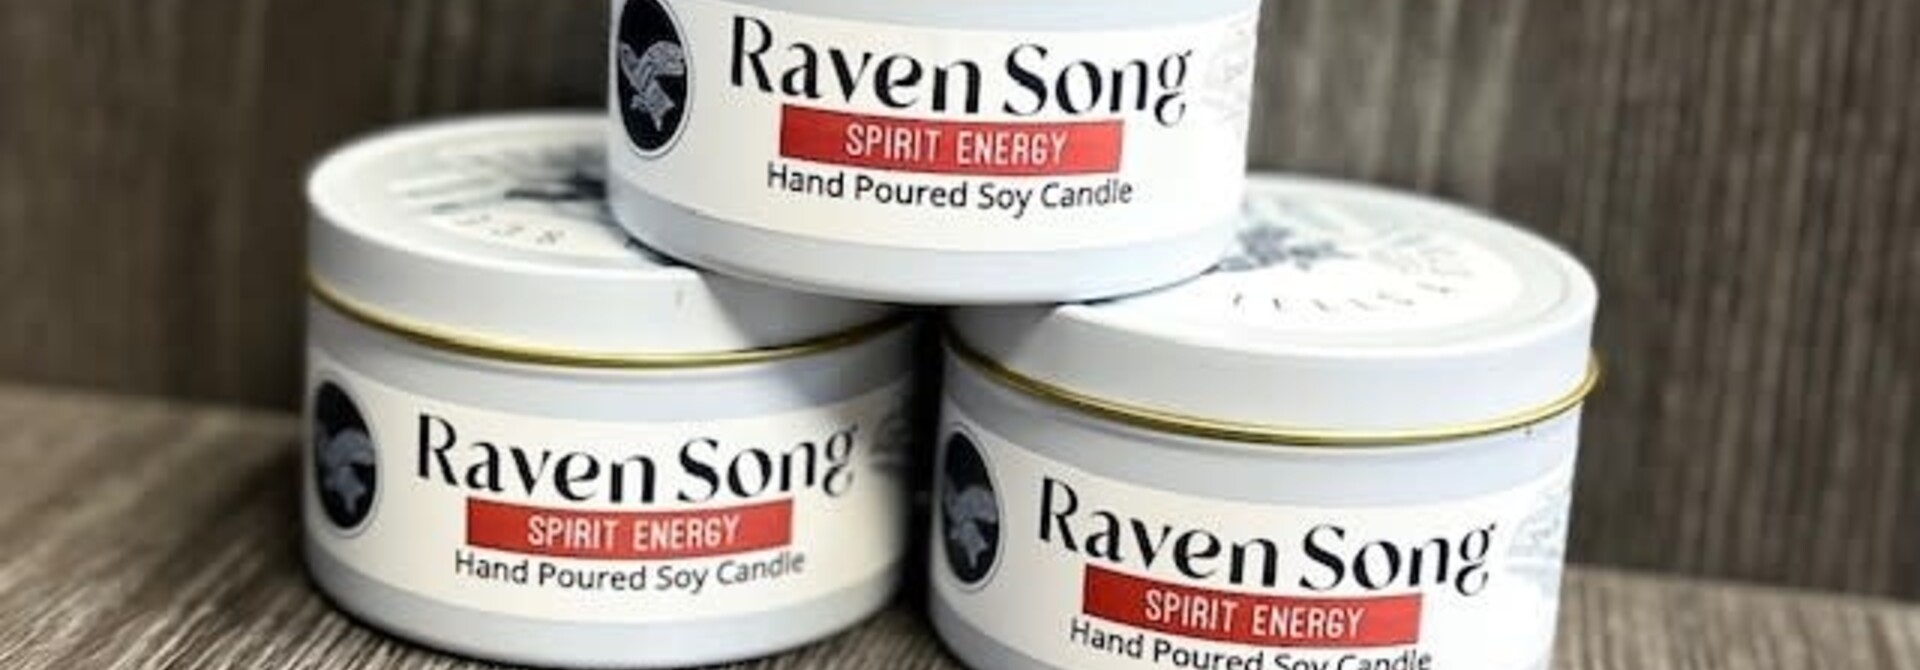 Raven Song hand poured soy Candle -Spirit Energy